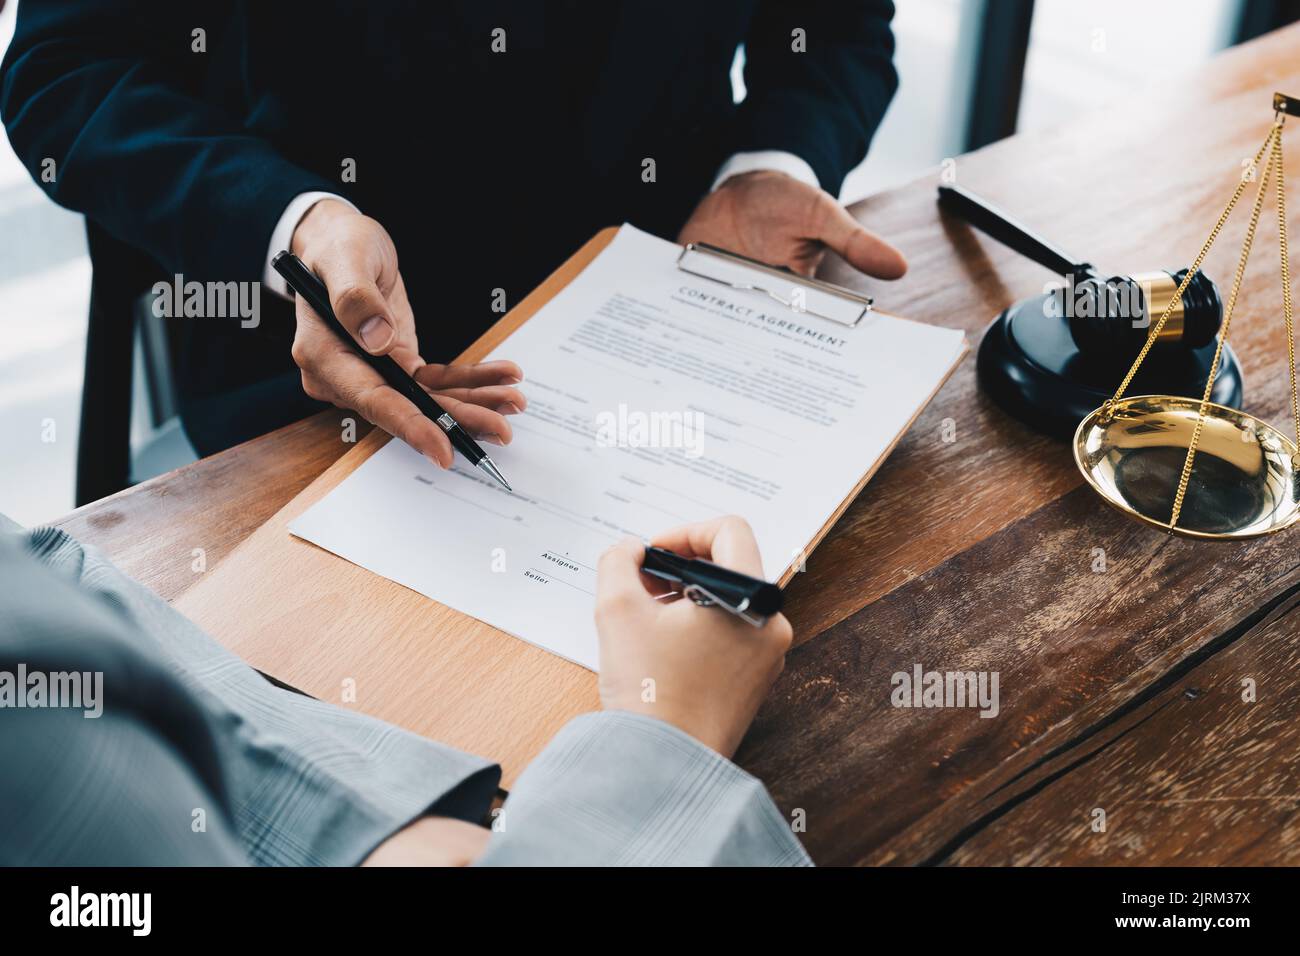 business people and lawyers discussing contract papers sitting at the table. Concepts of law, advice, legal services. Stock Photo